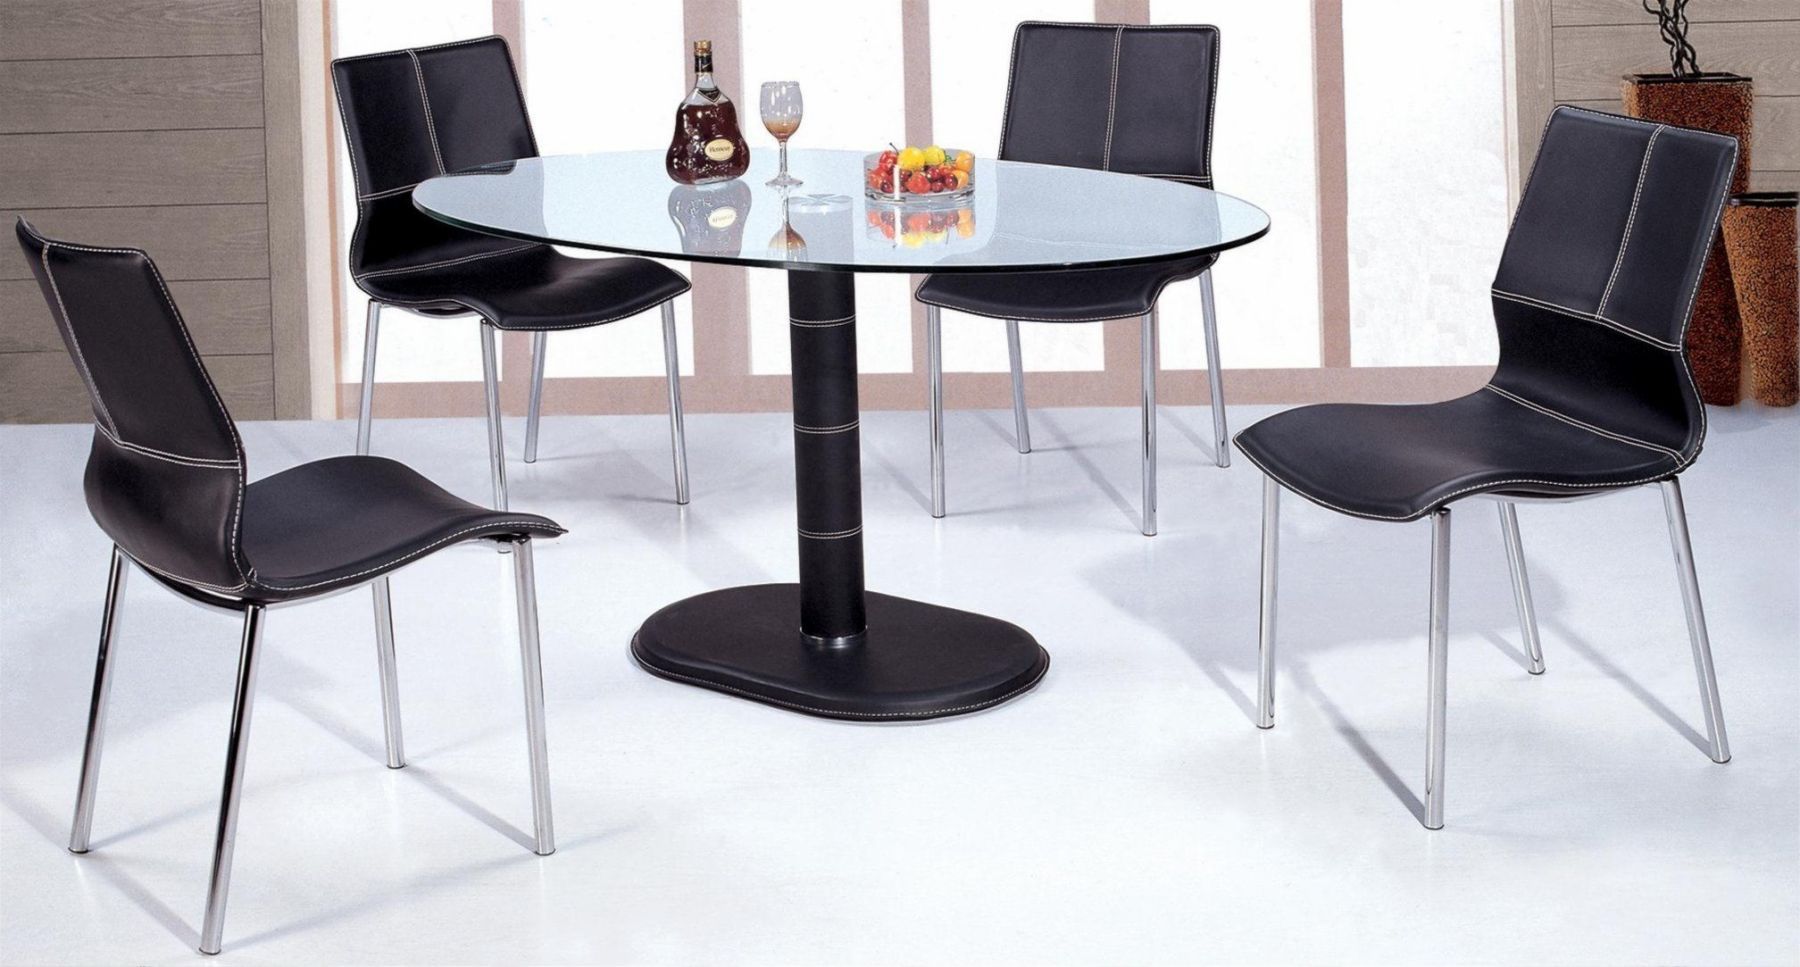 Chintaly Dinette Set  Price Upon RequestCall (631) 742-1351 for Best Price Guarantee